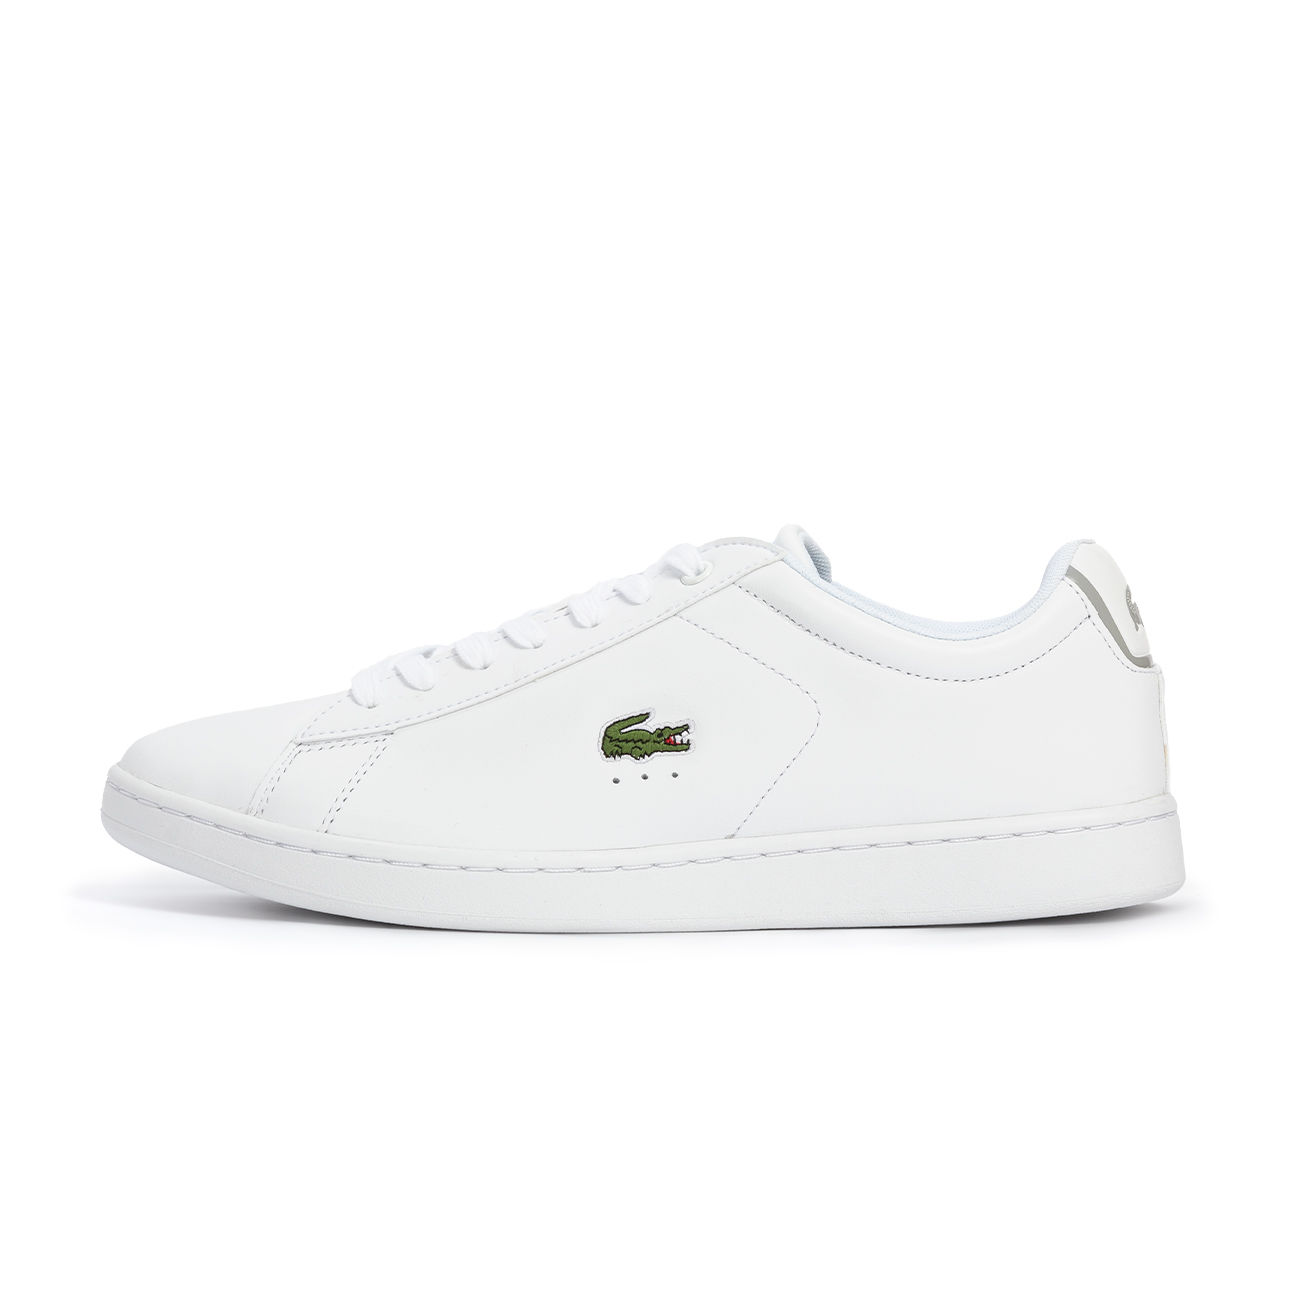 LACOSTE CARNABY LEATHER Man | Mascheroni Store